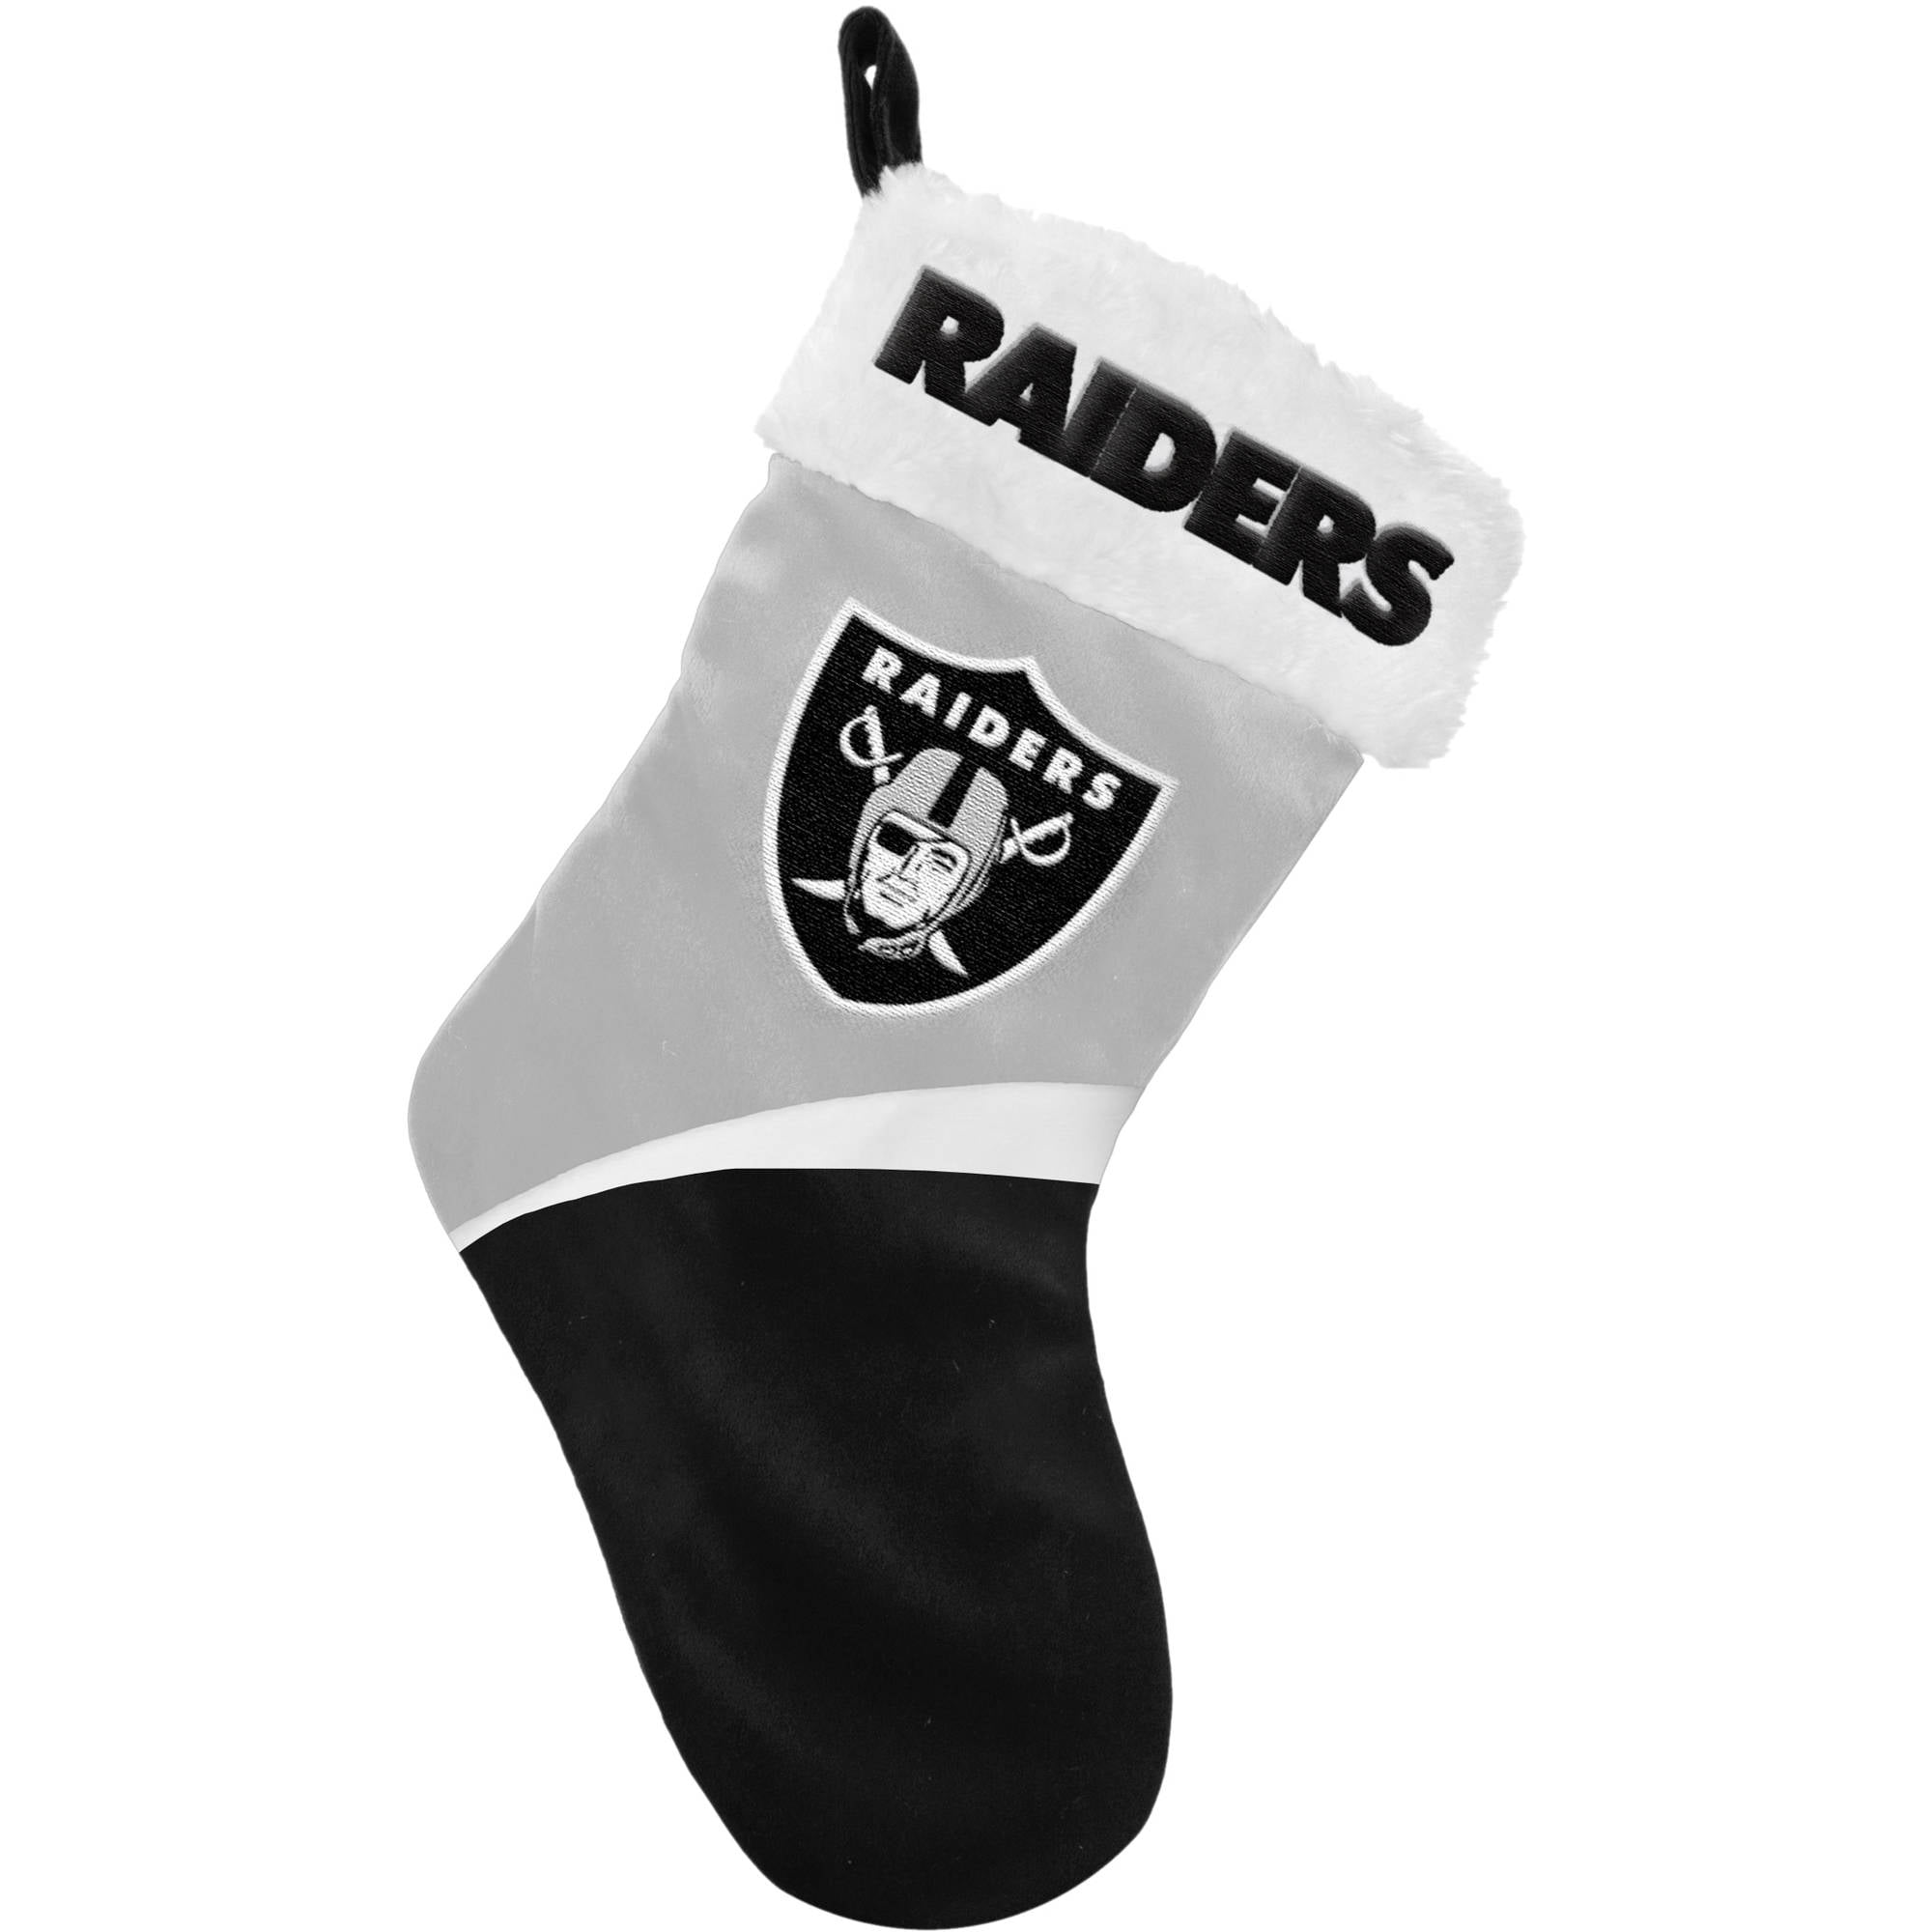 Team Beans Forever Collectibles Oakland Raiders Stocking 